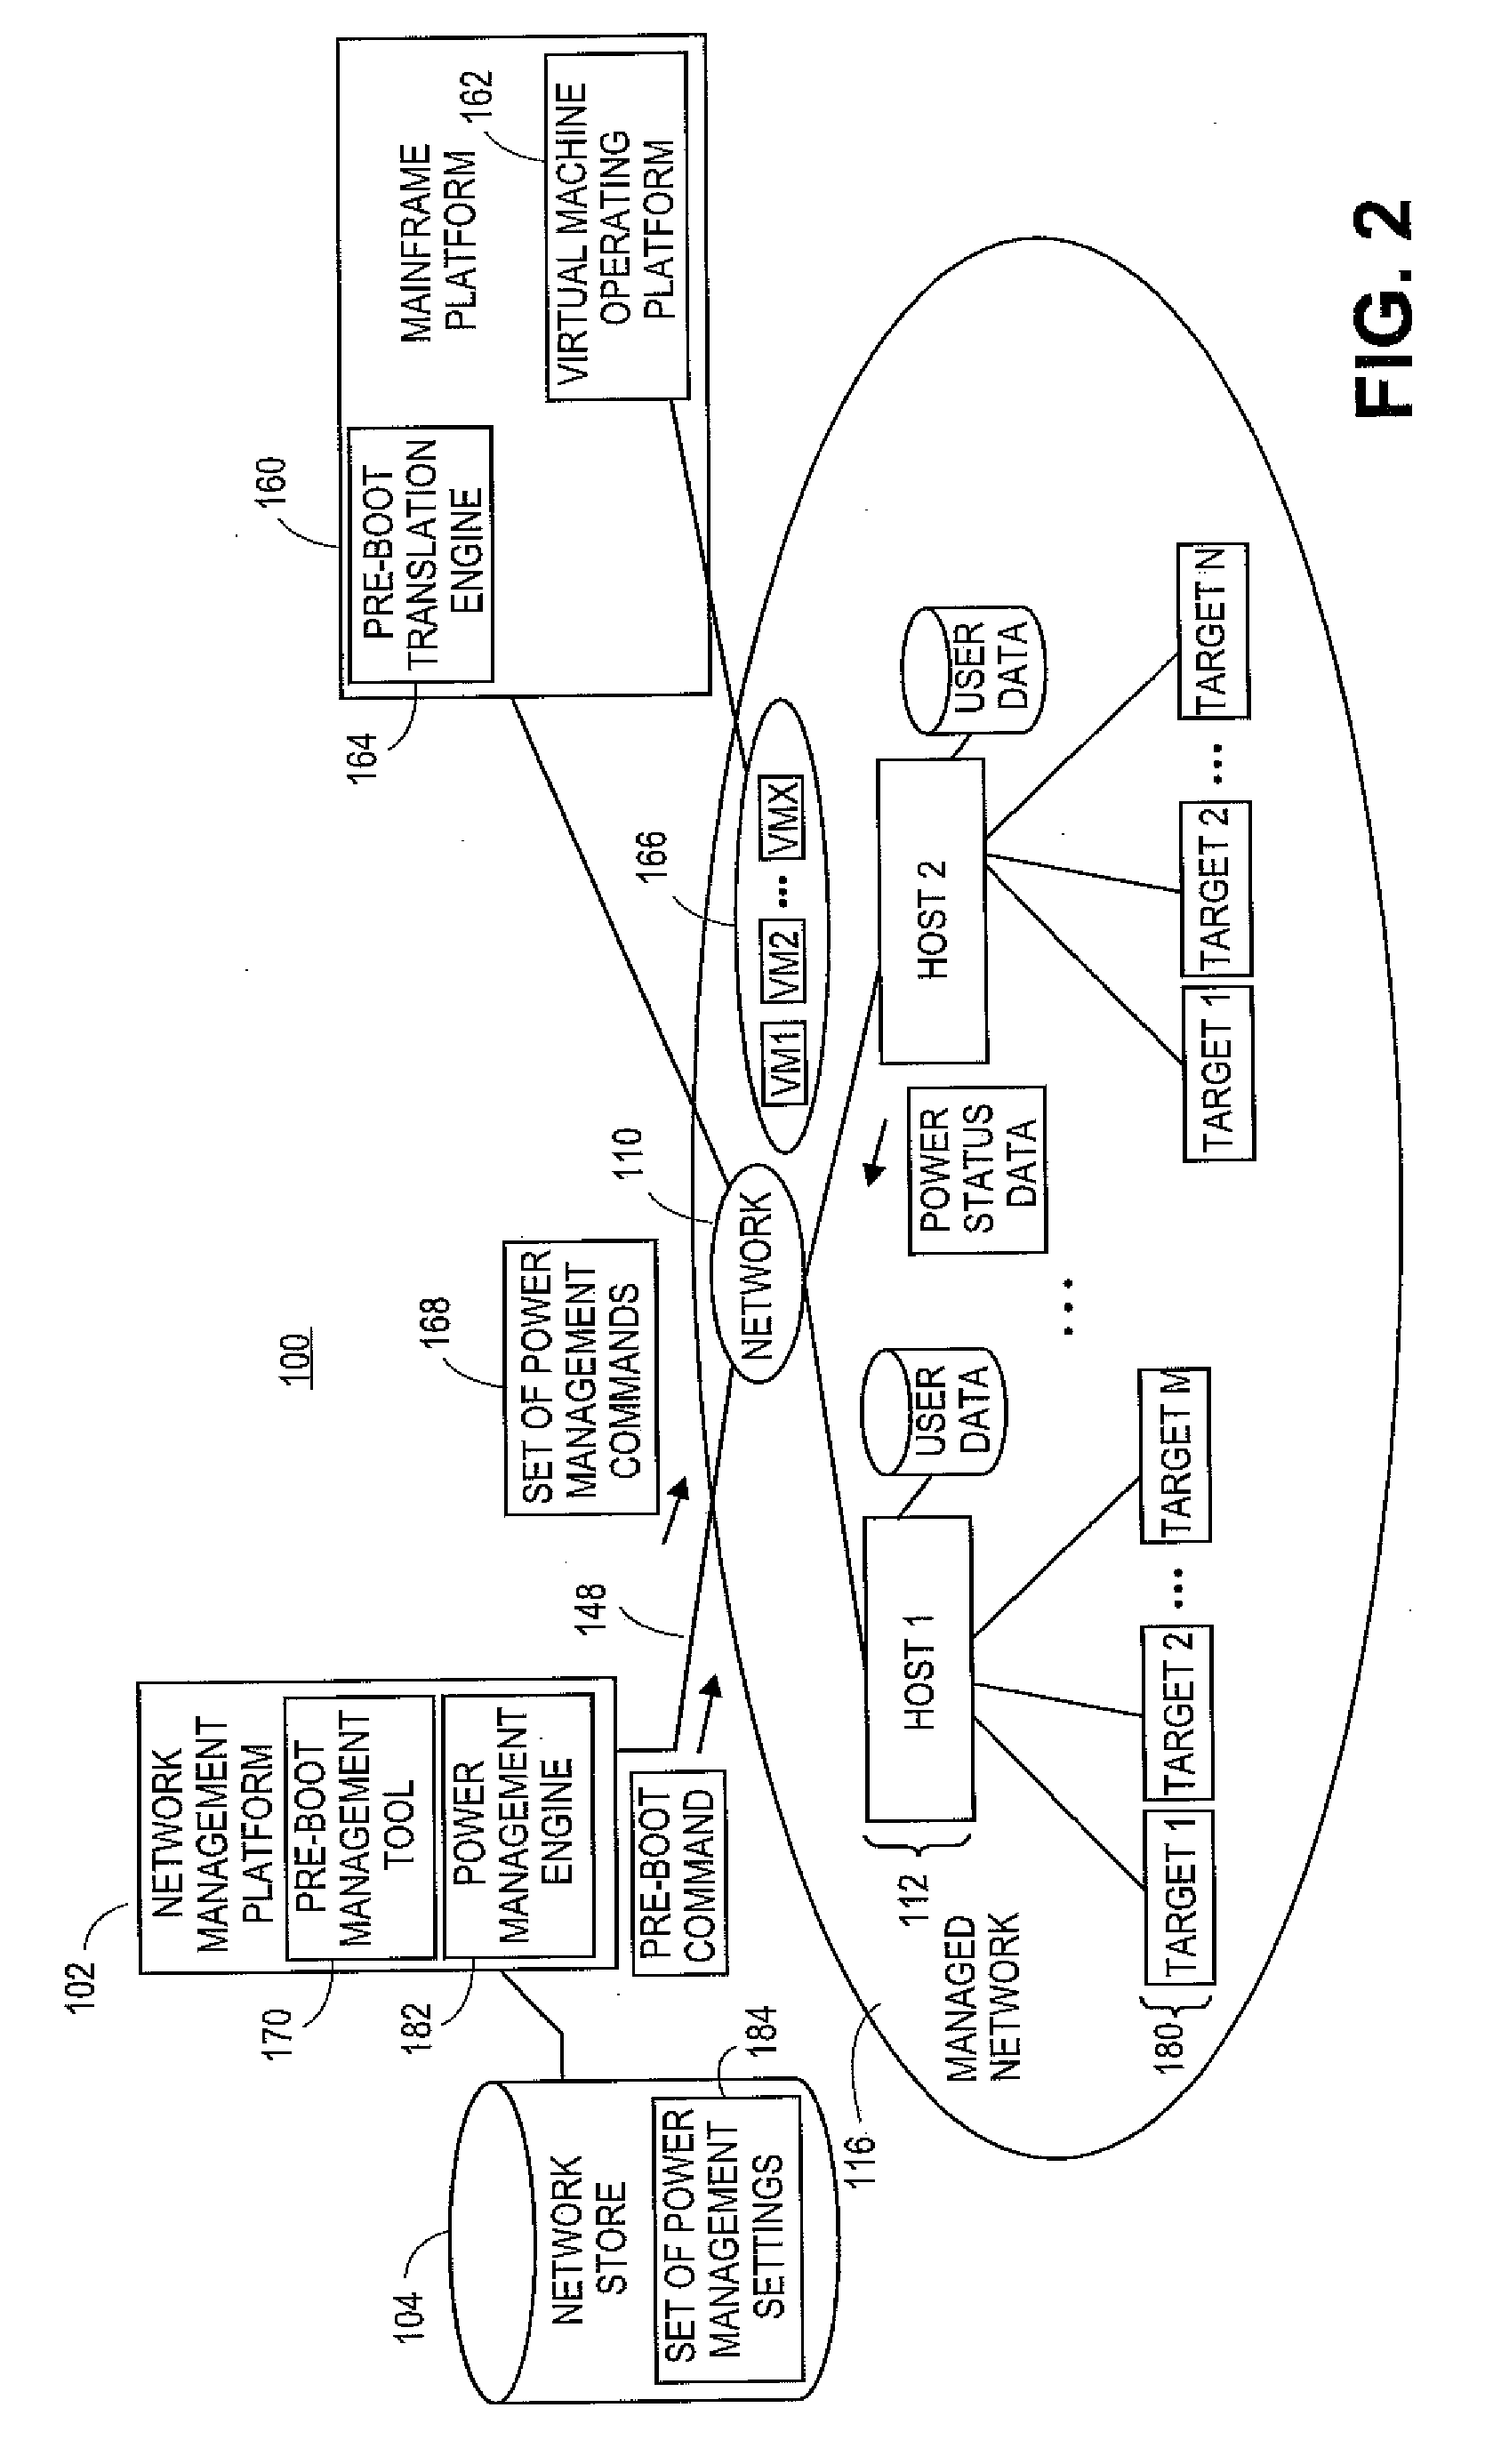 Systems and methods for power management in managed network having hardware-based and virtual resources